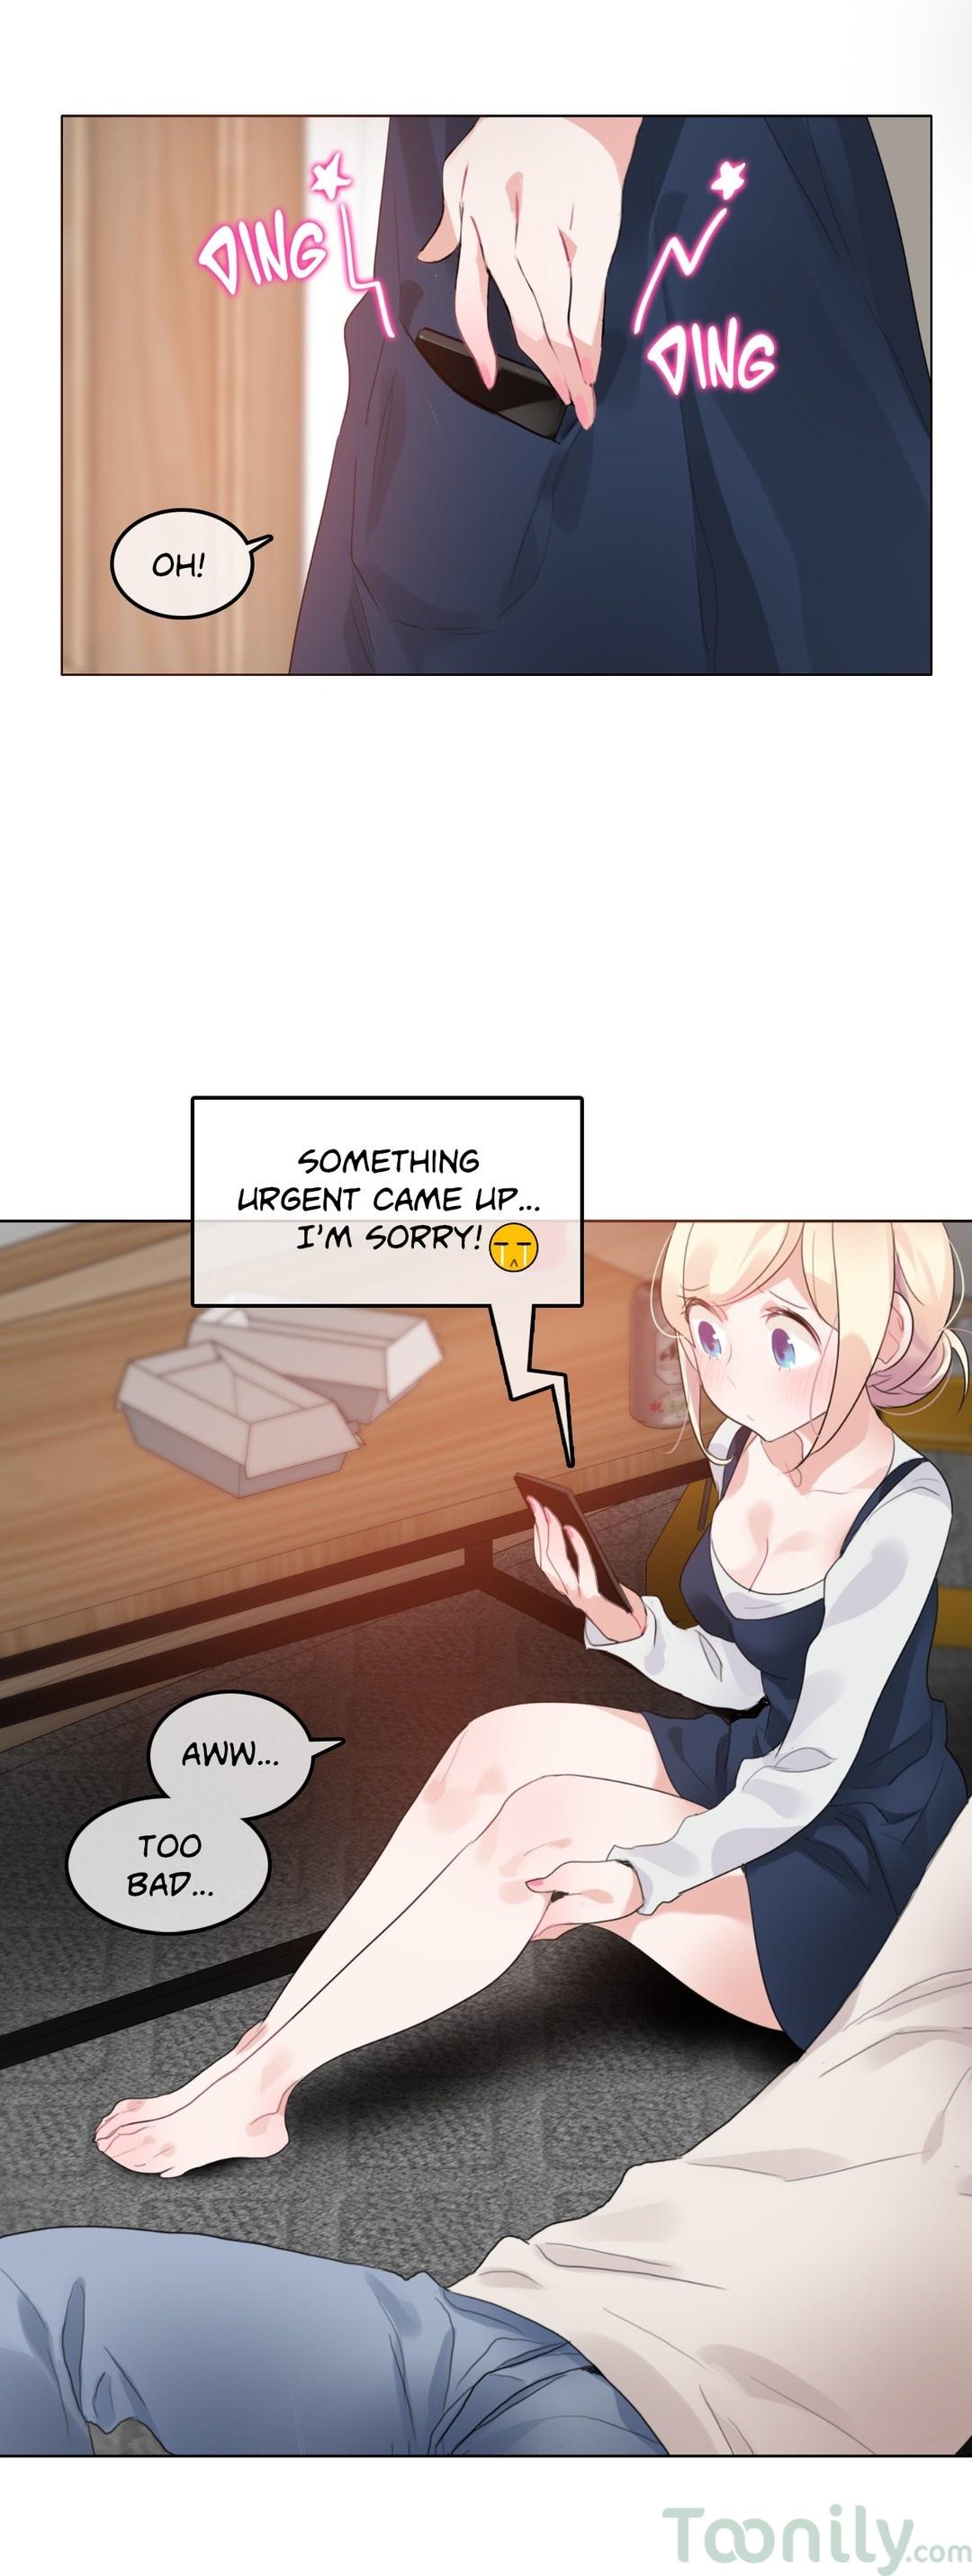 A Pervert's Daily Life • Chapter 61-65 49